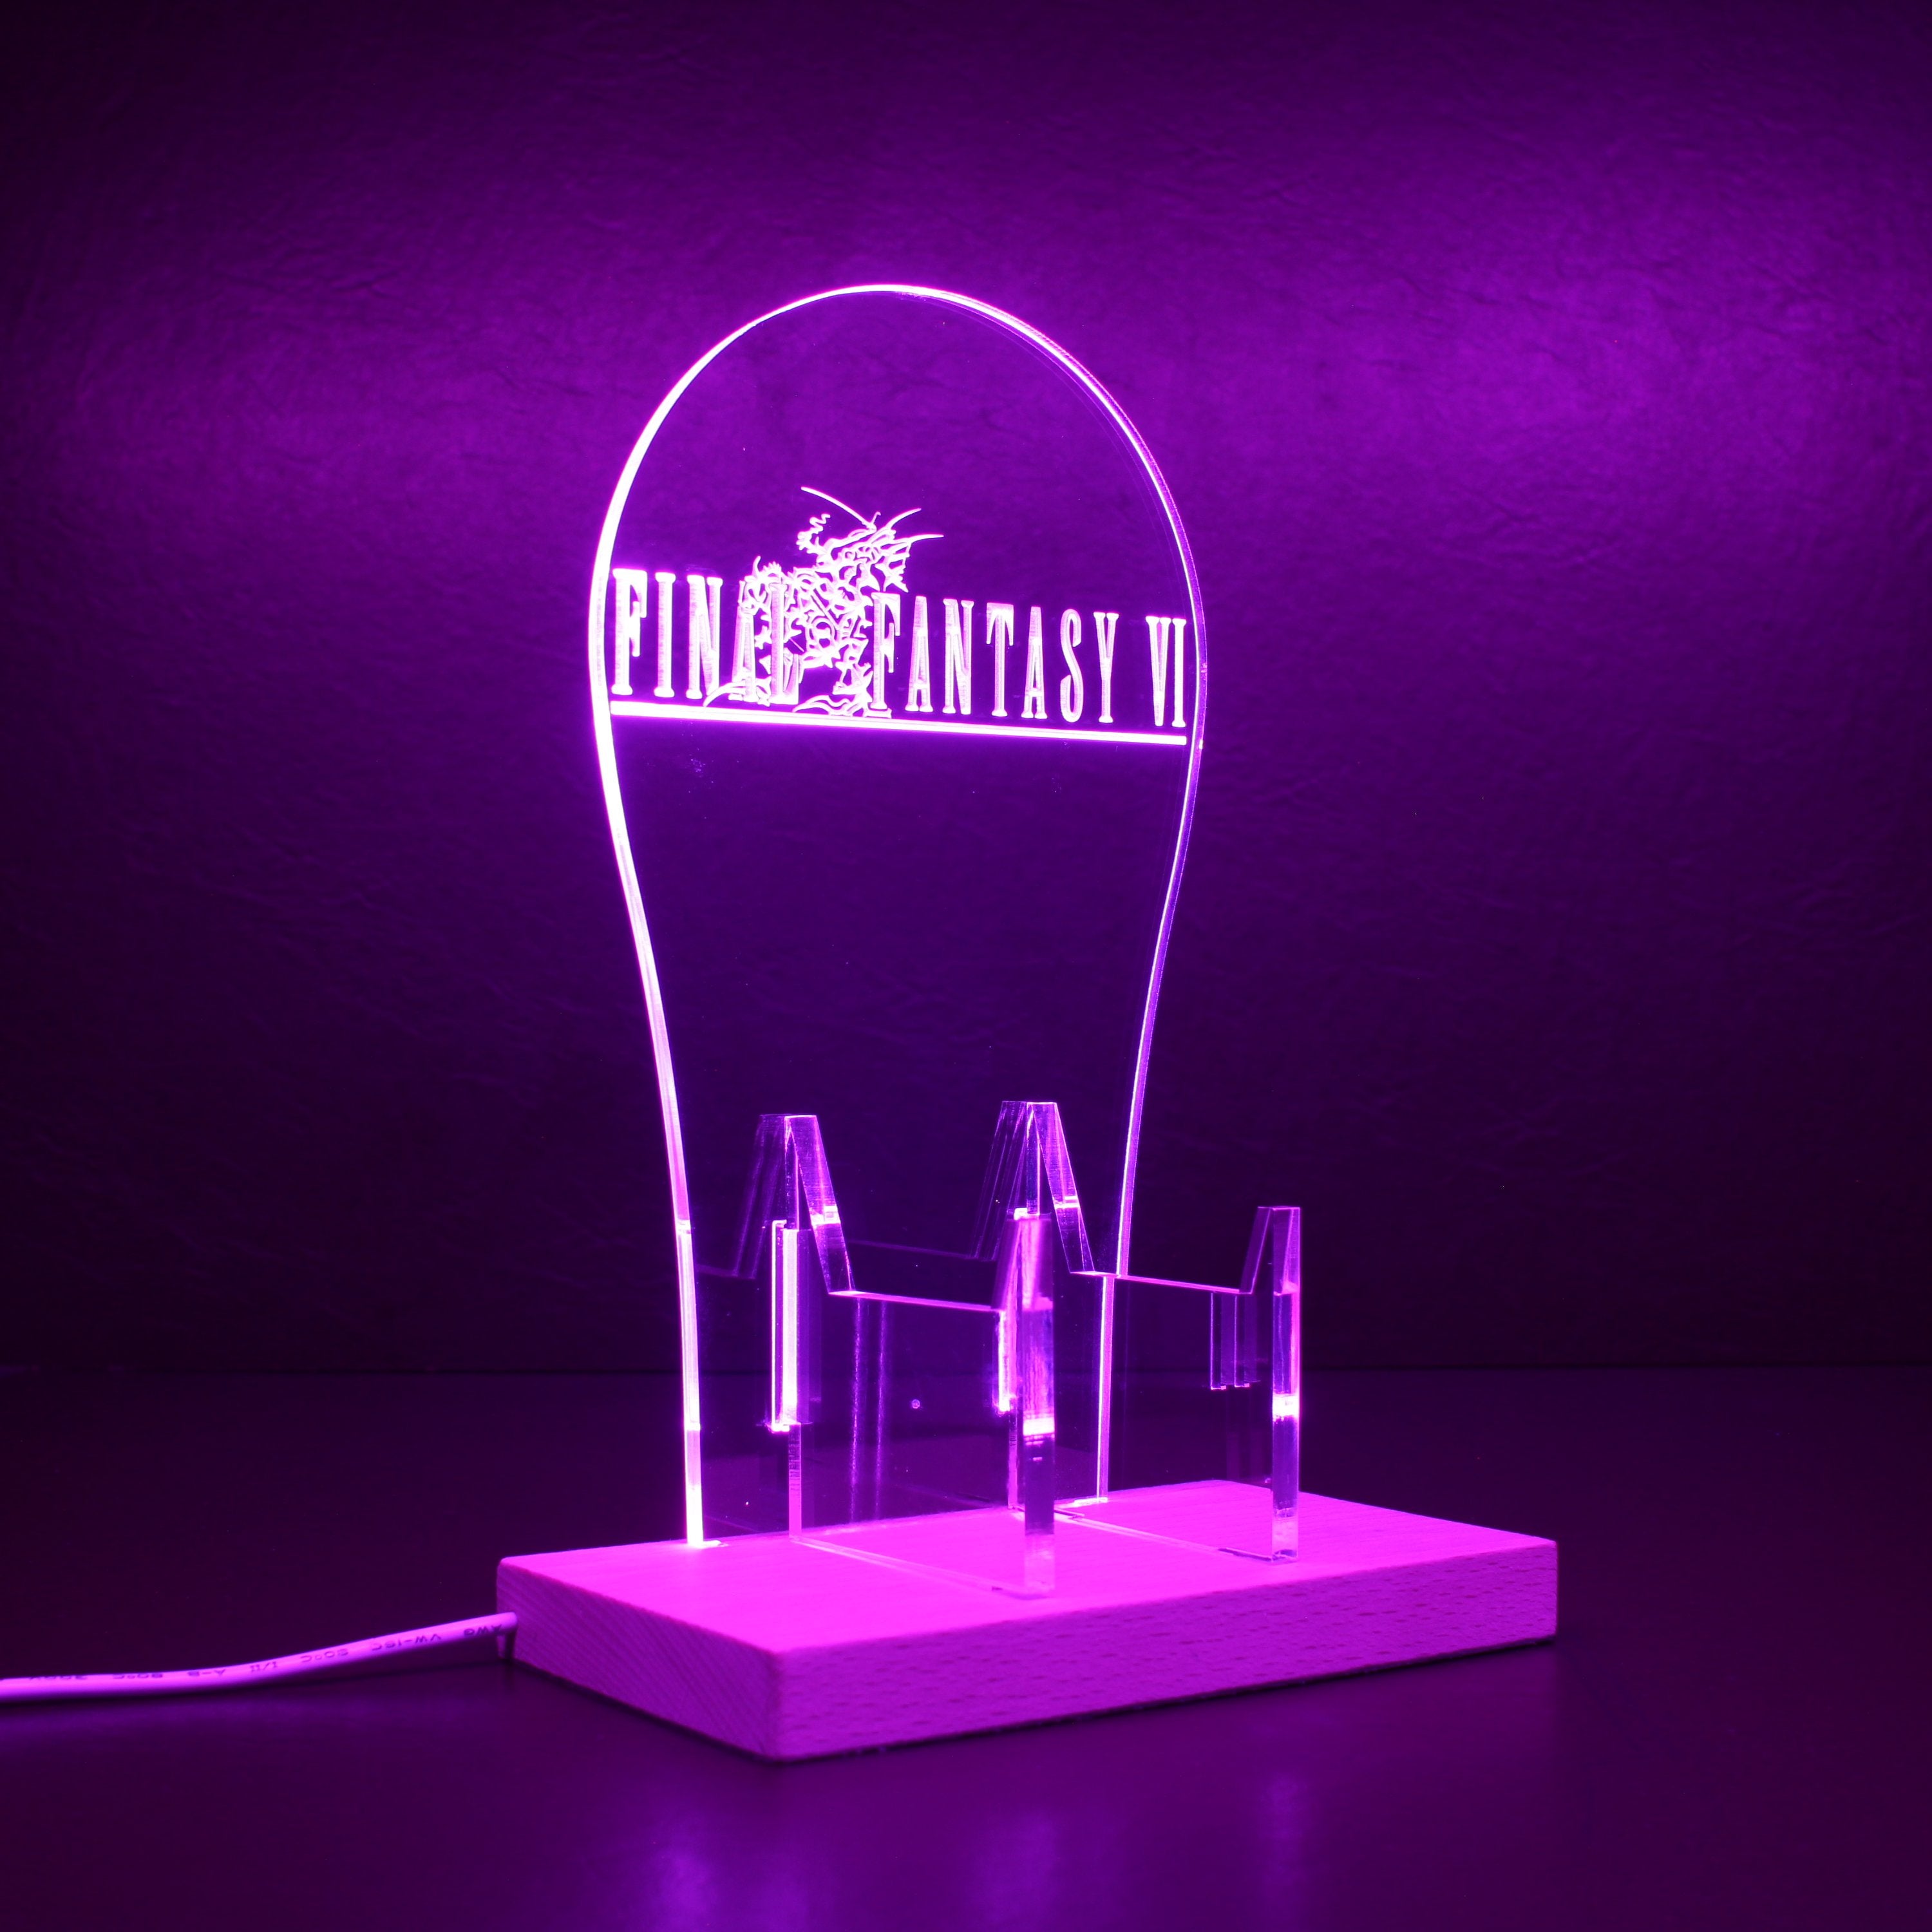 Final Fantasy VI RGB LED Gaming Headset Controller Stand